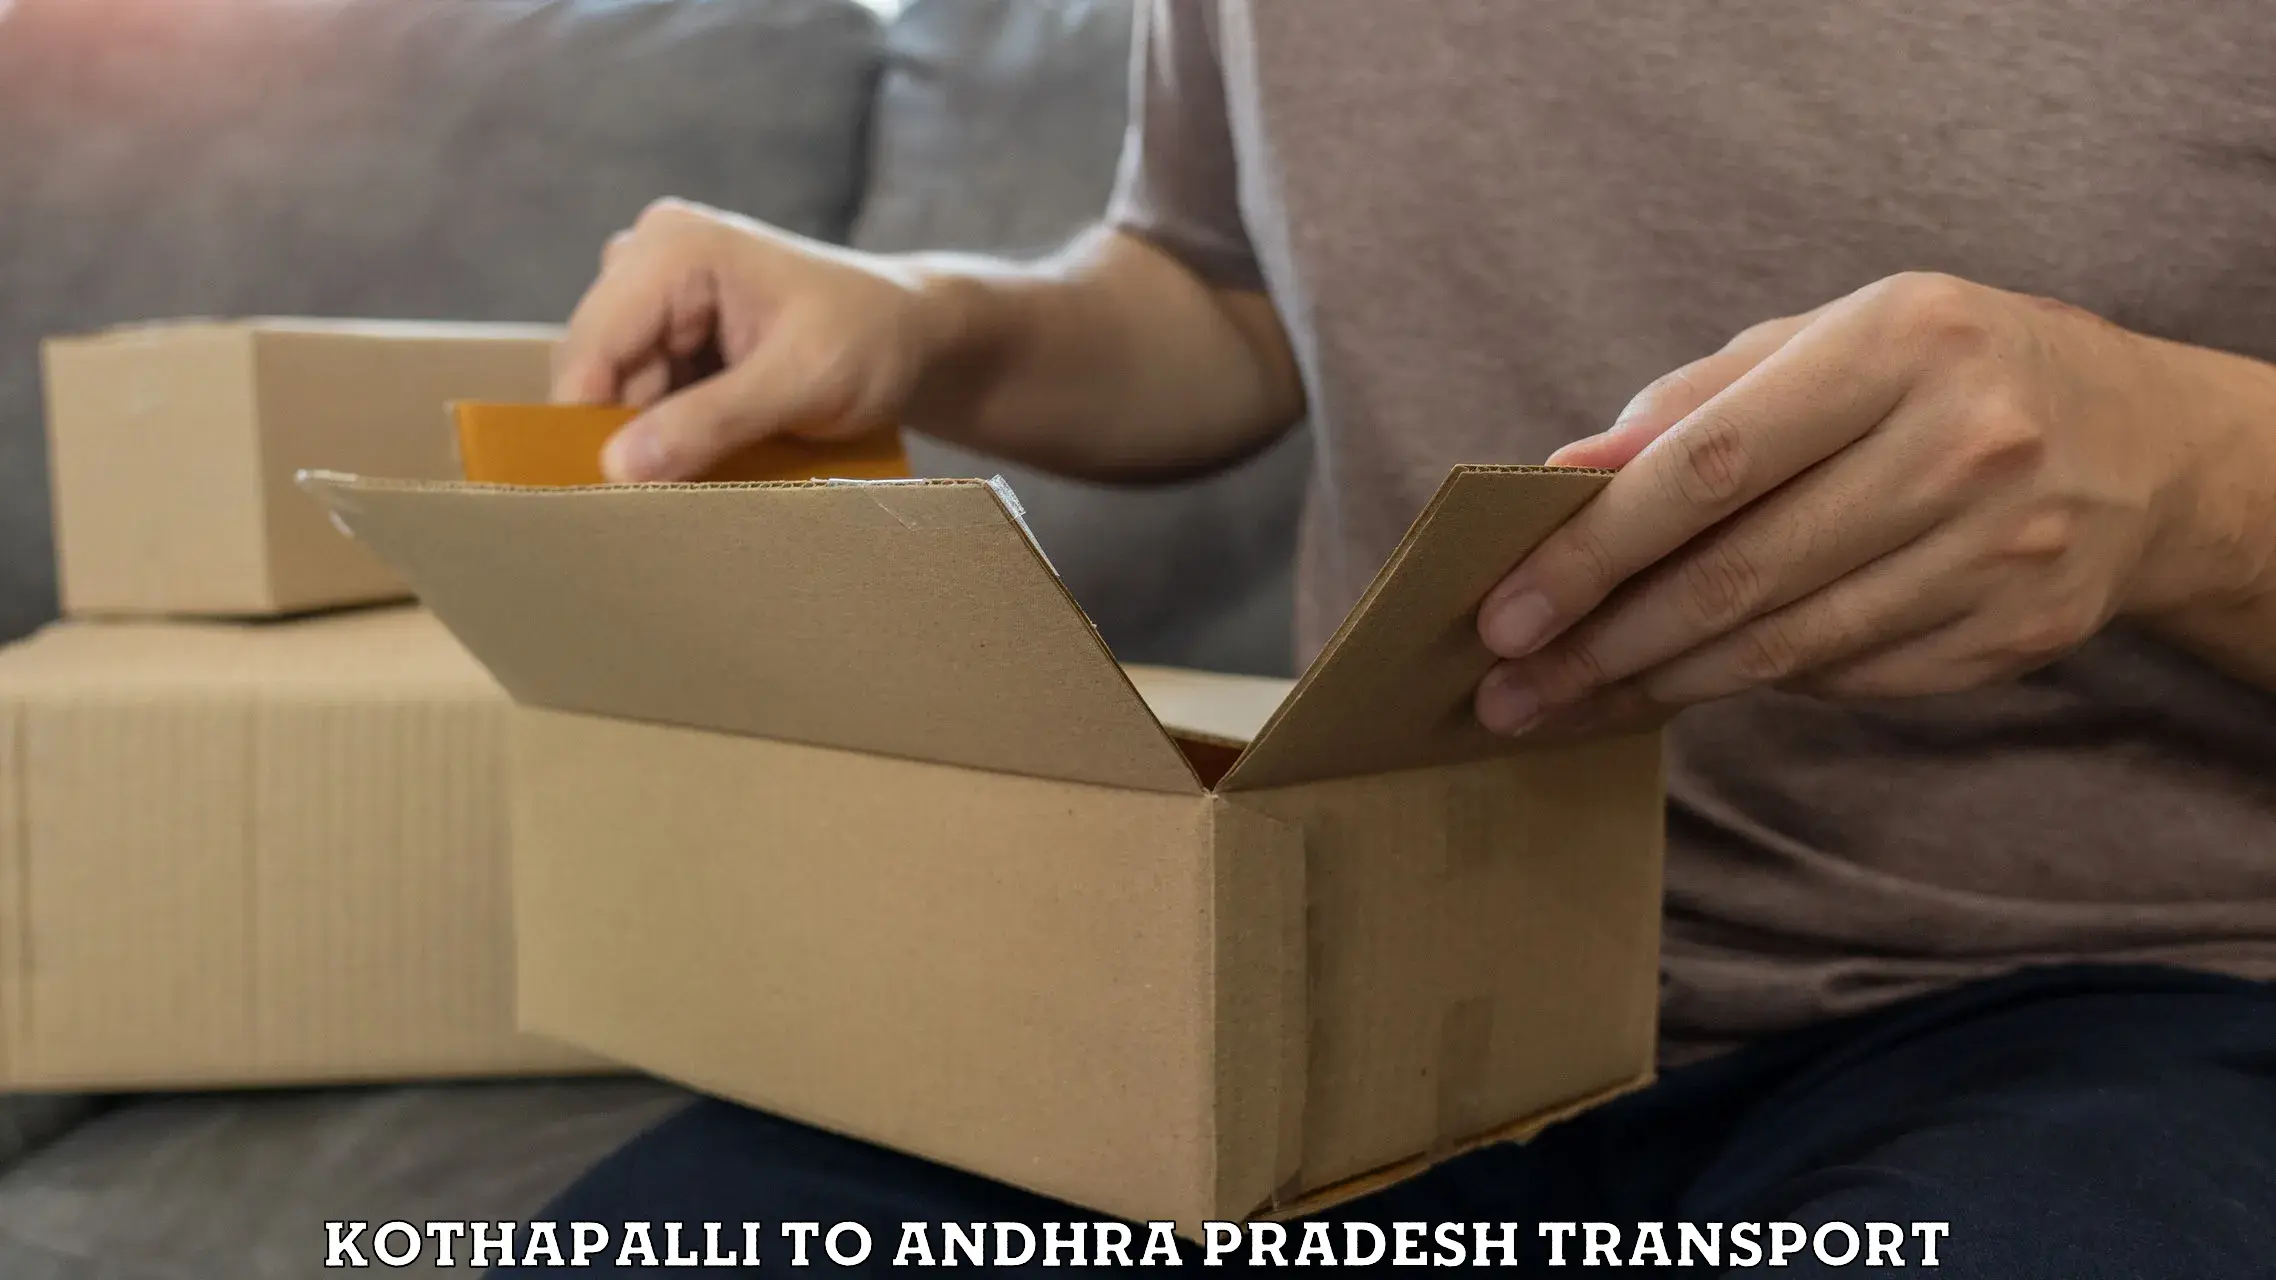 Goods delivery service Kothapalli to Andhra Pradesh